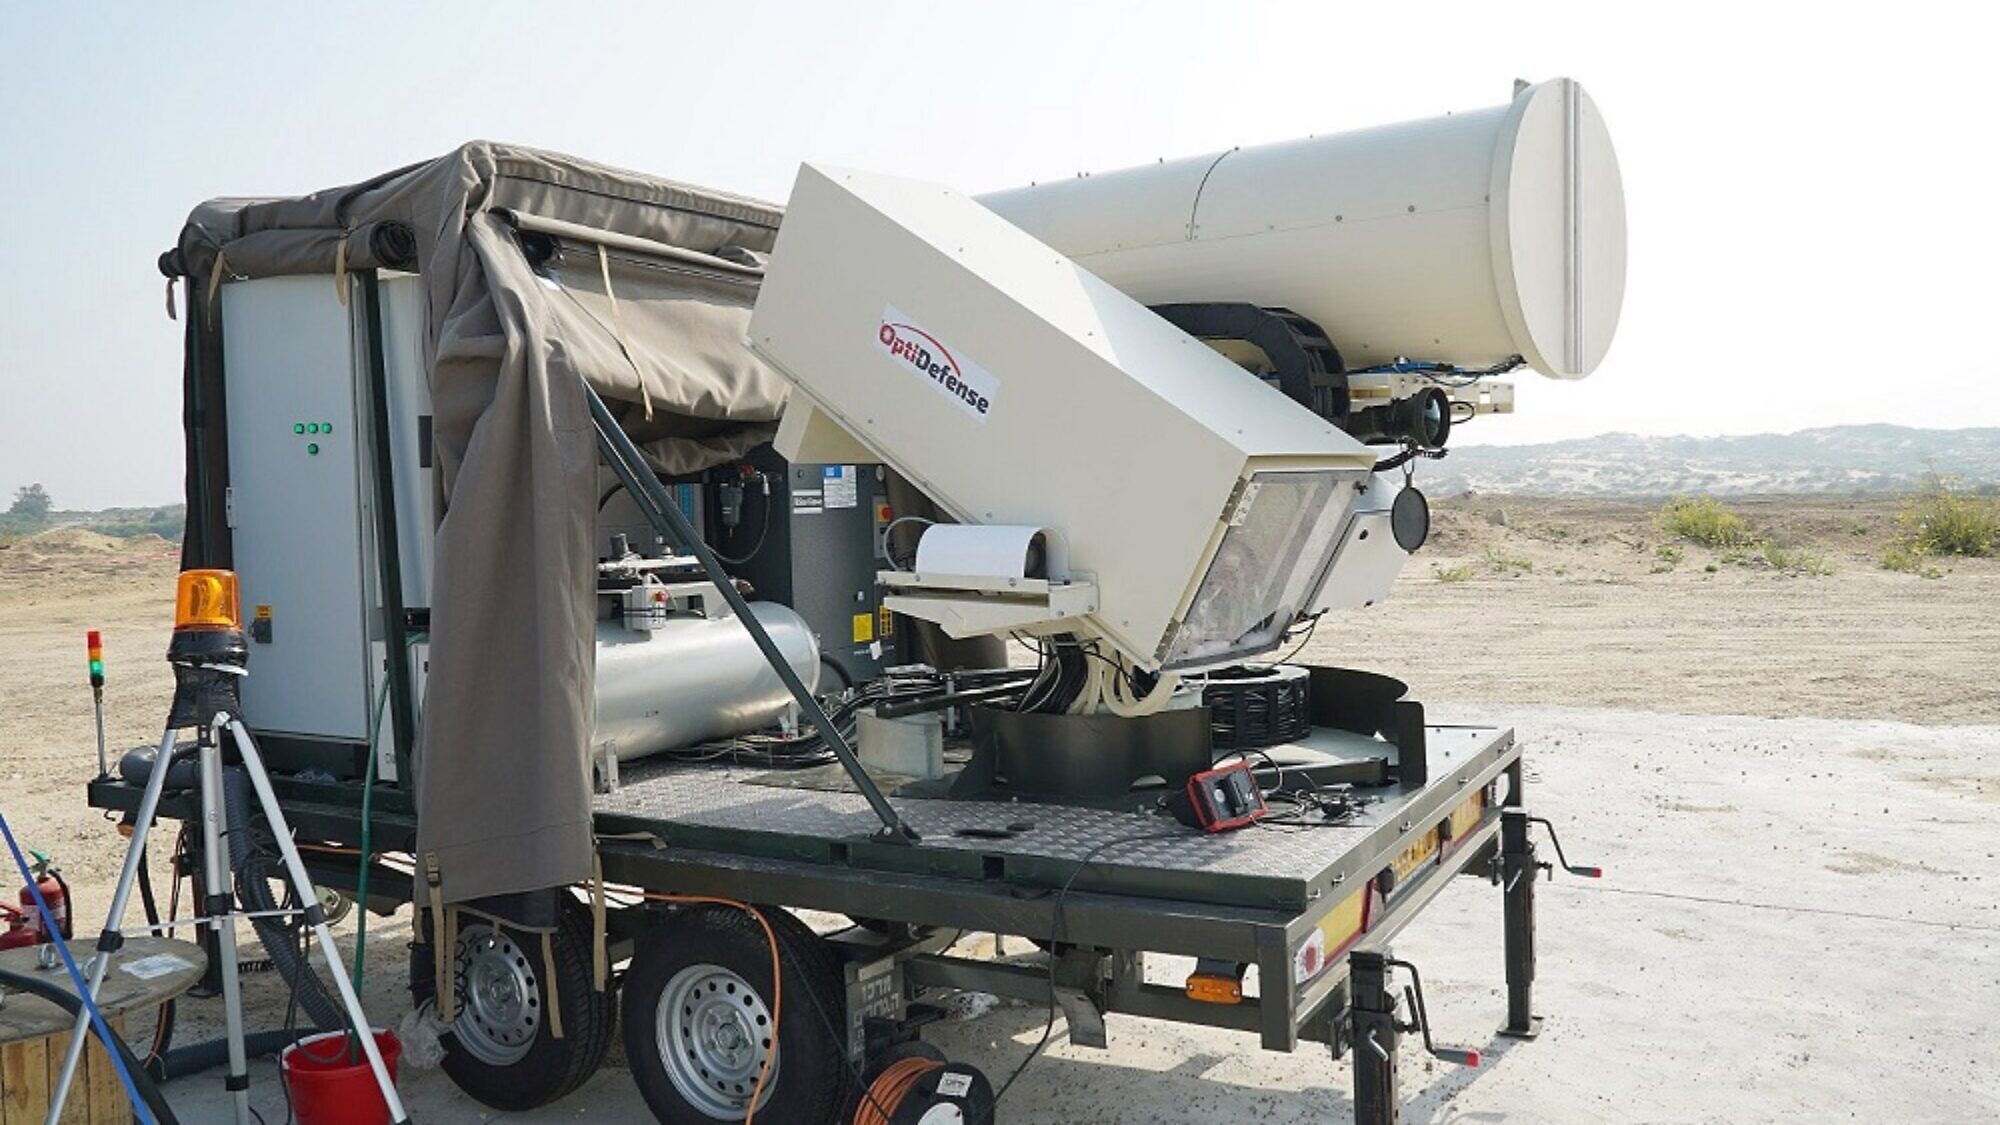 Israel’s ‘Light Blade’ laser system said to have near-perfect interception rate